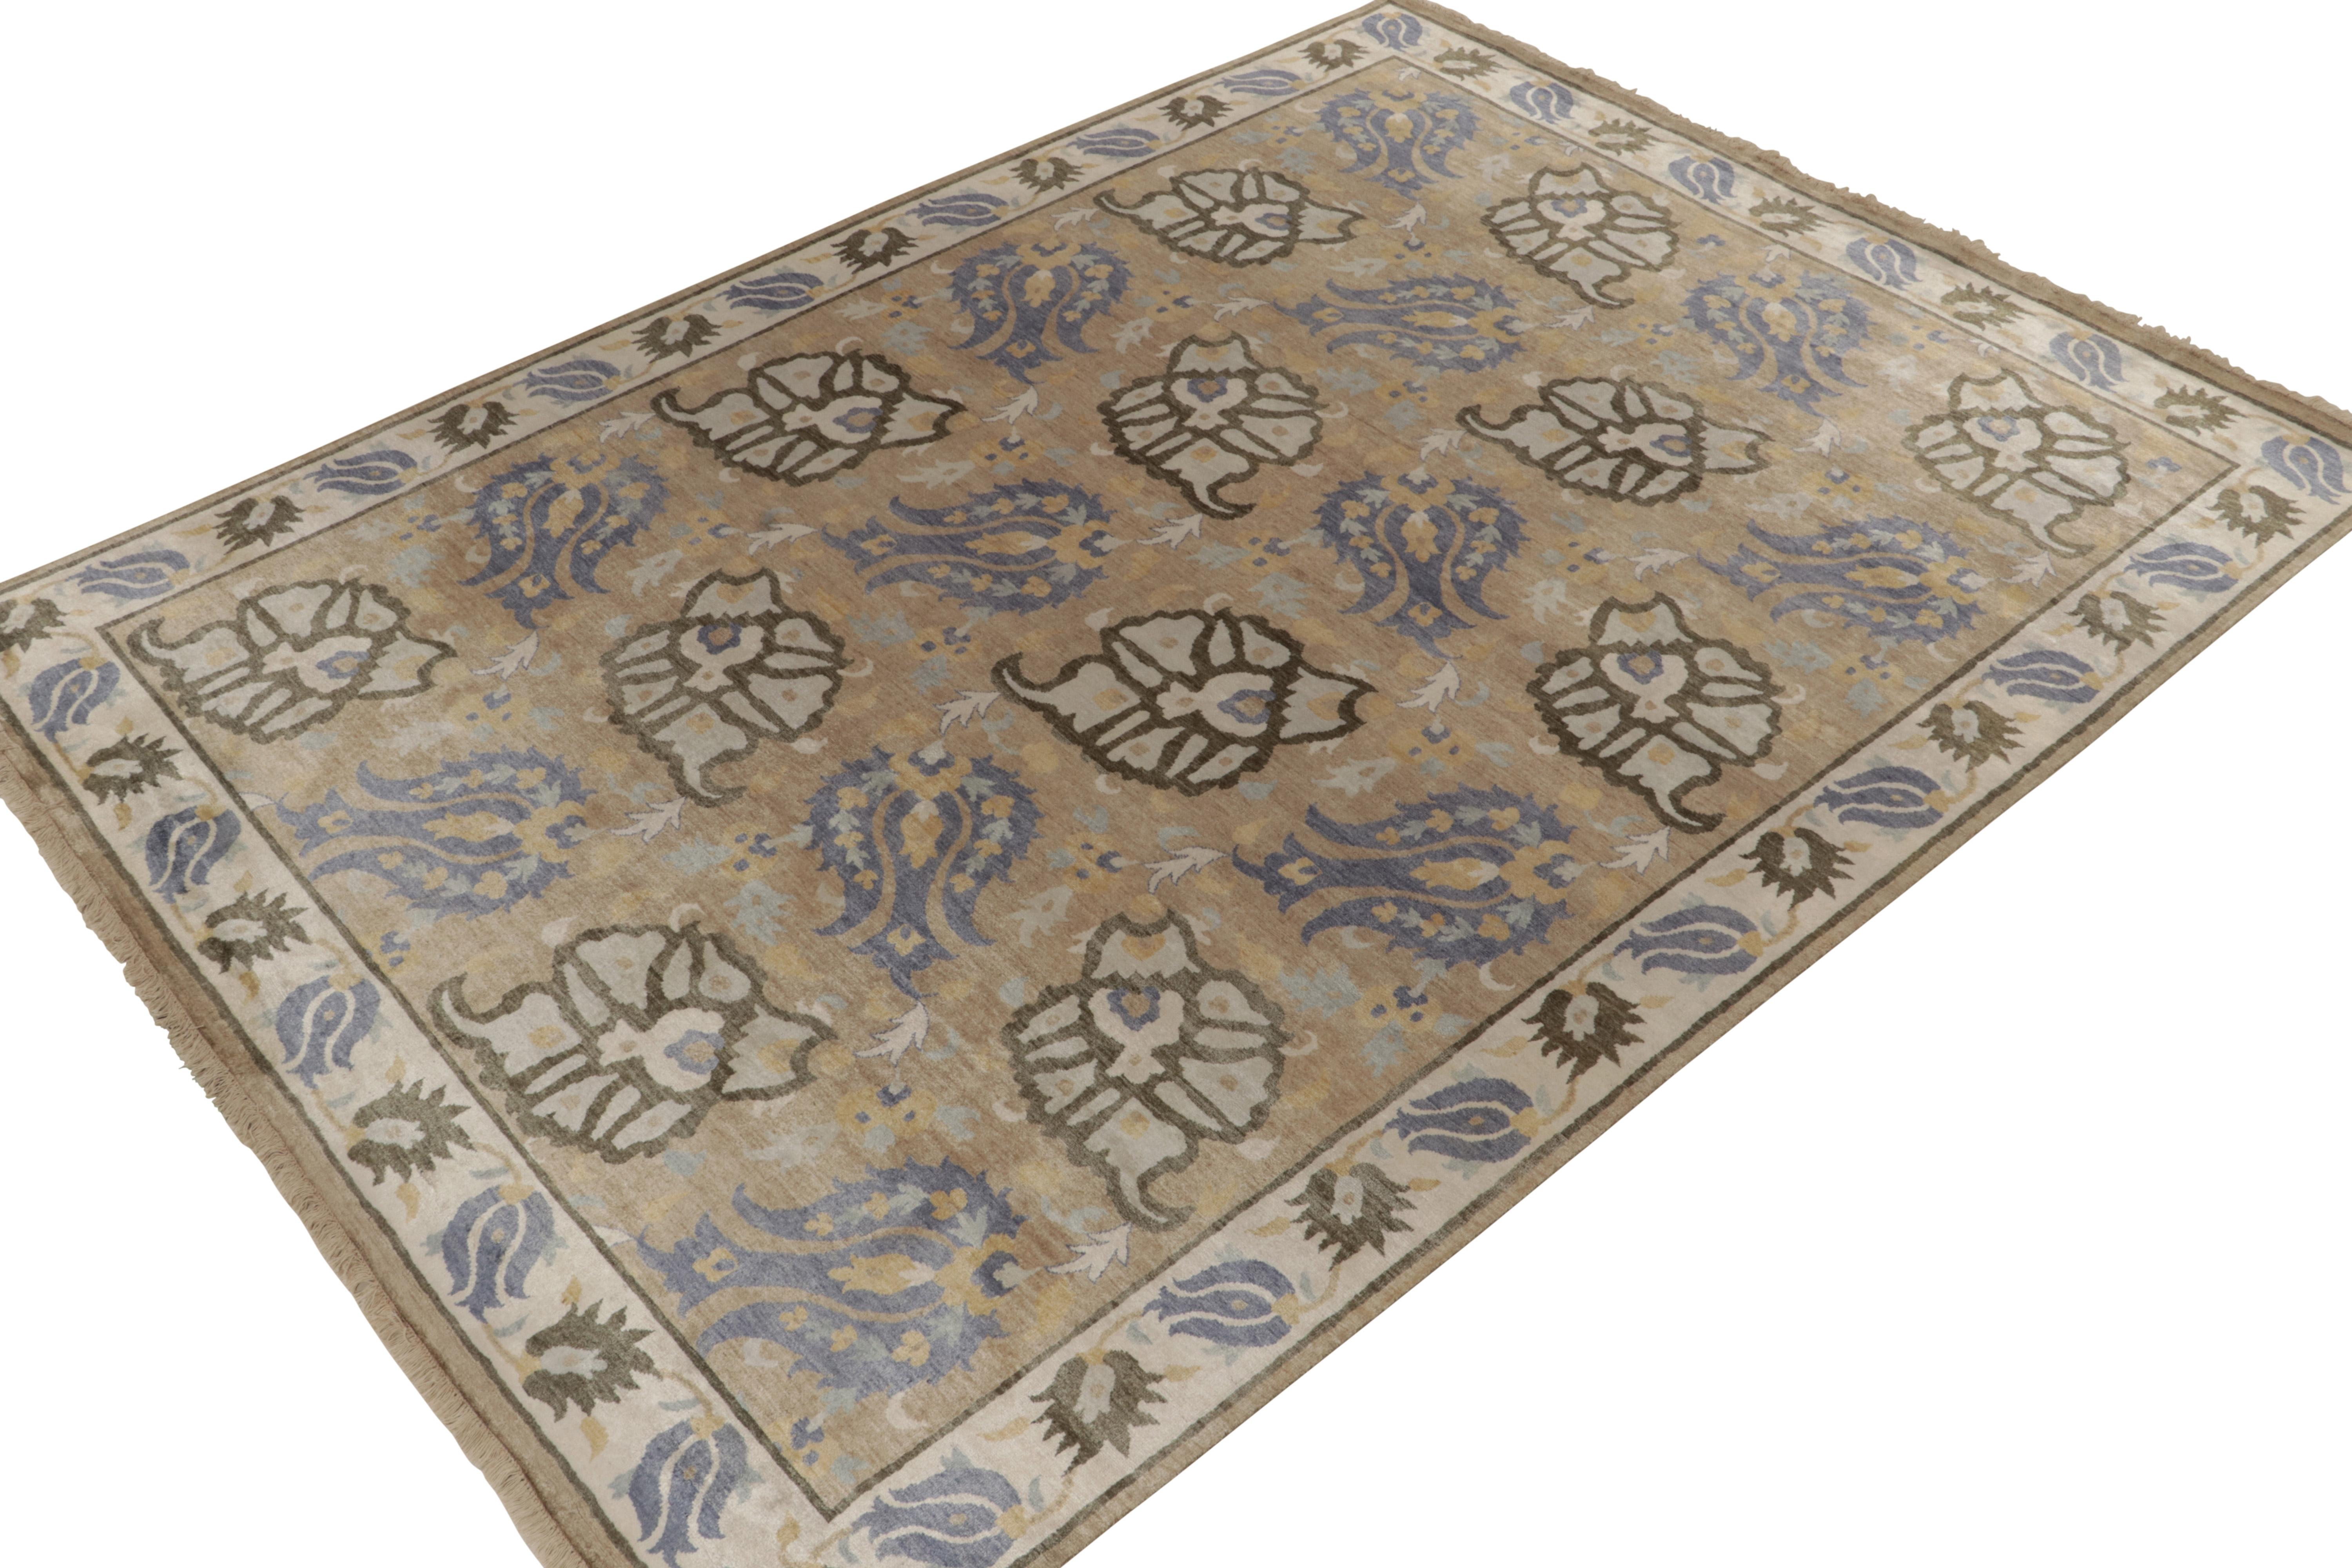 From Rug & Kilim’s Modern Classics selections, a 9x12 hand-knotted silk rug with an inventive adaptation of history styles. 

On the design: The field and border enjoy a take on tribal floral patterns, flourishing in blue, ivory and gold atop